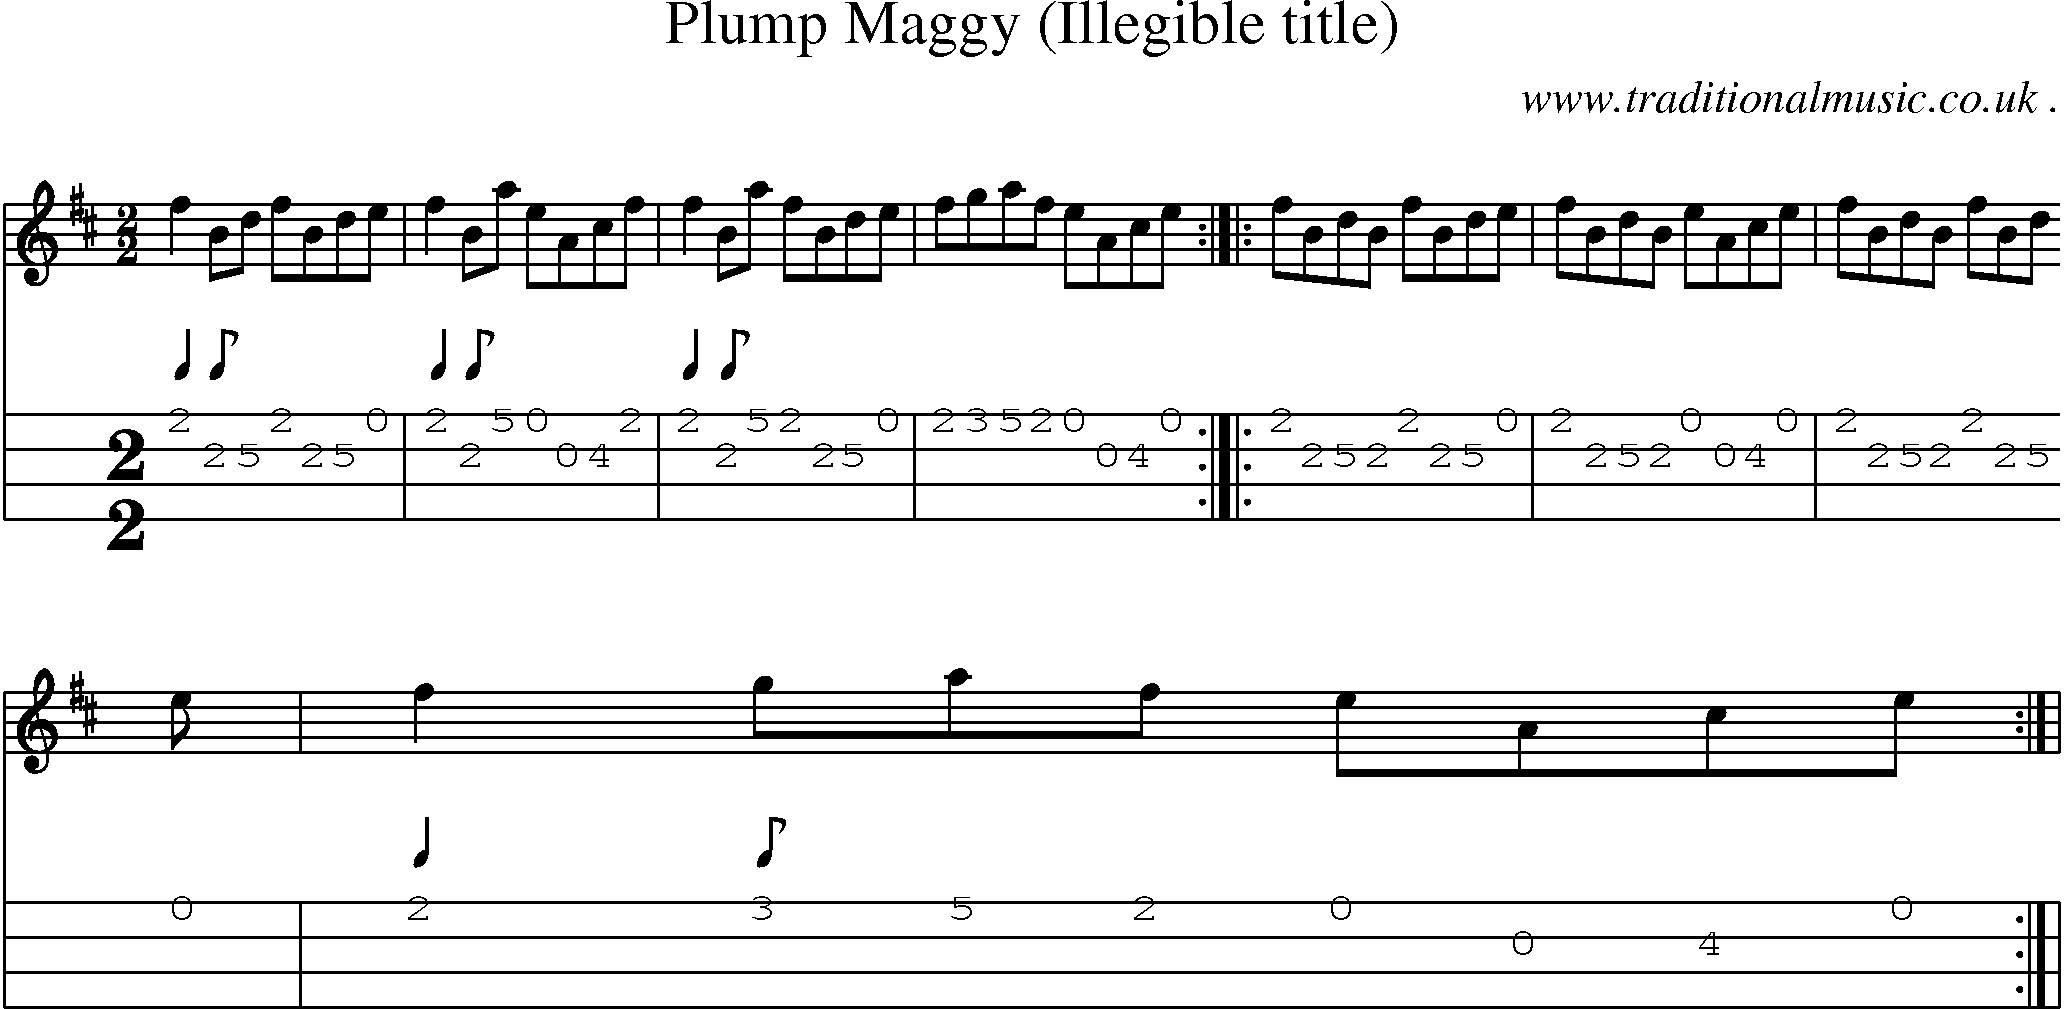 Sheet-Music and Mandolin Tabs for Plump Maggy (illegible Title)